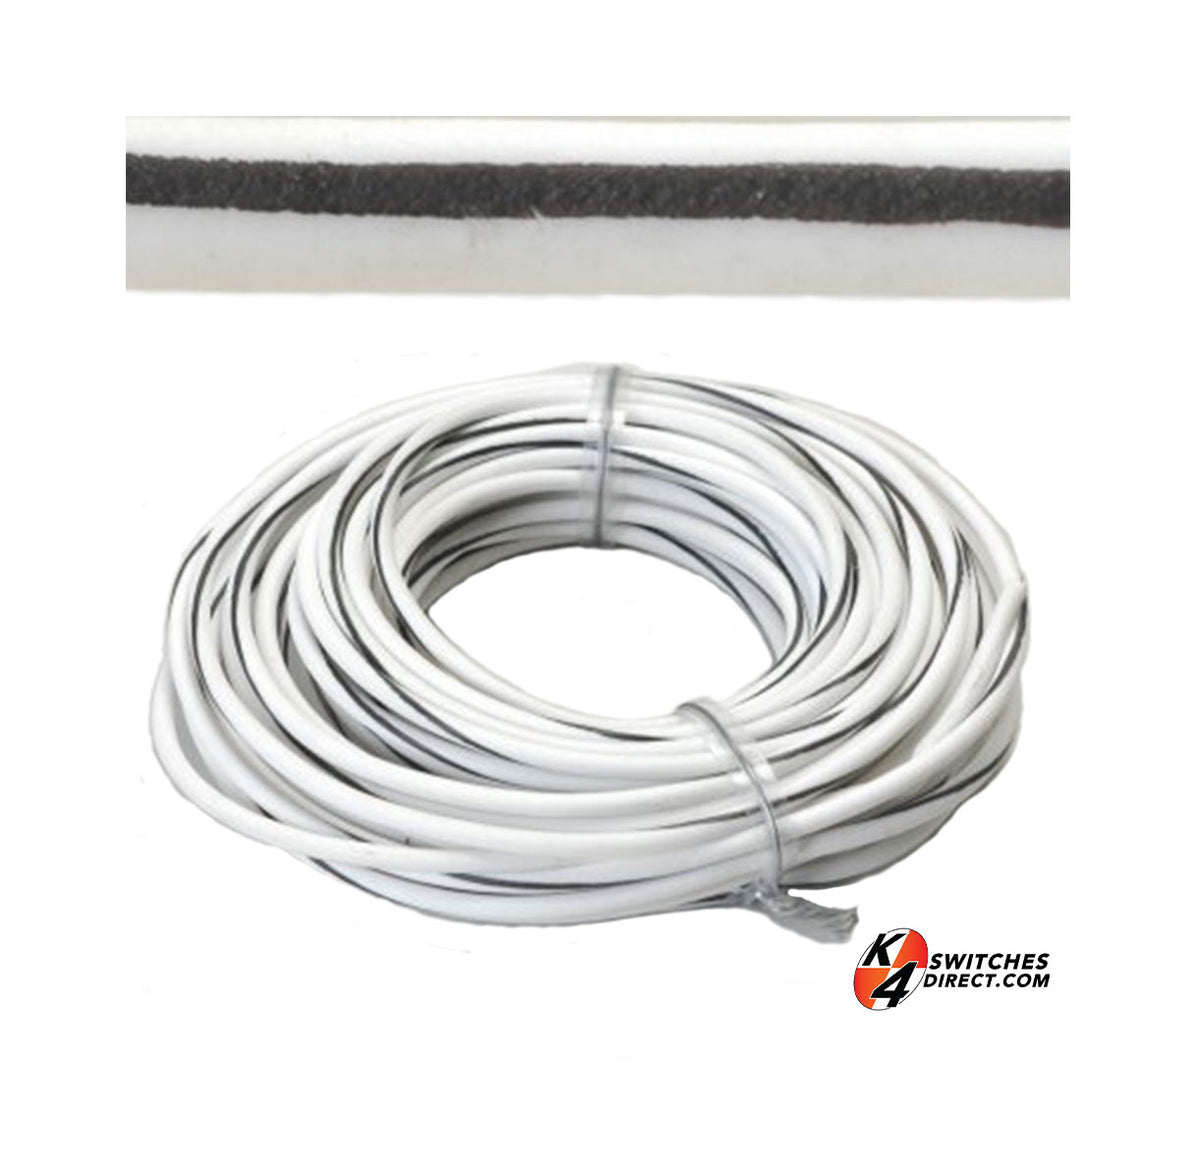 NTE Electronics WHS18-09-25 Hook Up Wire, Solid, Type 18 Gauge, 25' Length,  300V, White: Electrical Wires: : Industrial & Scientific